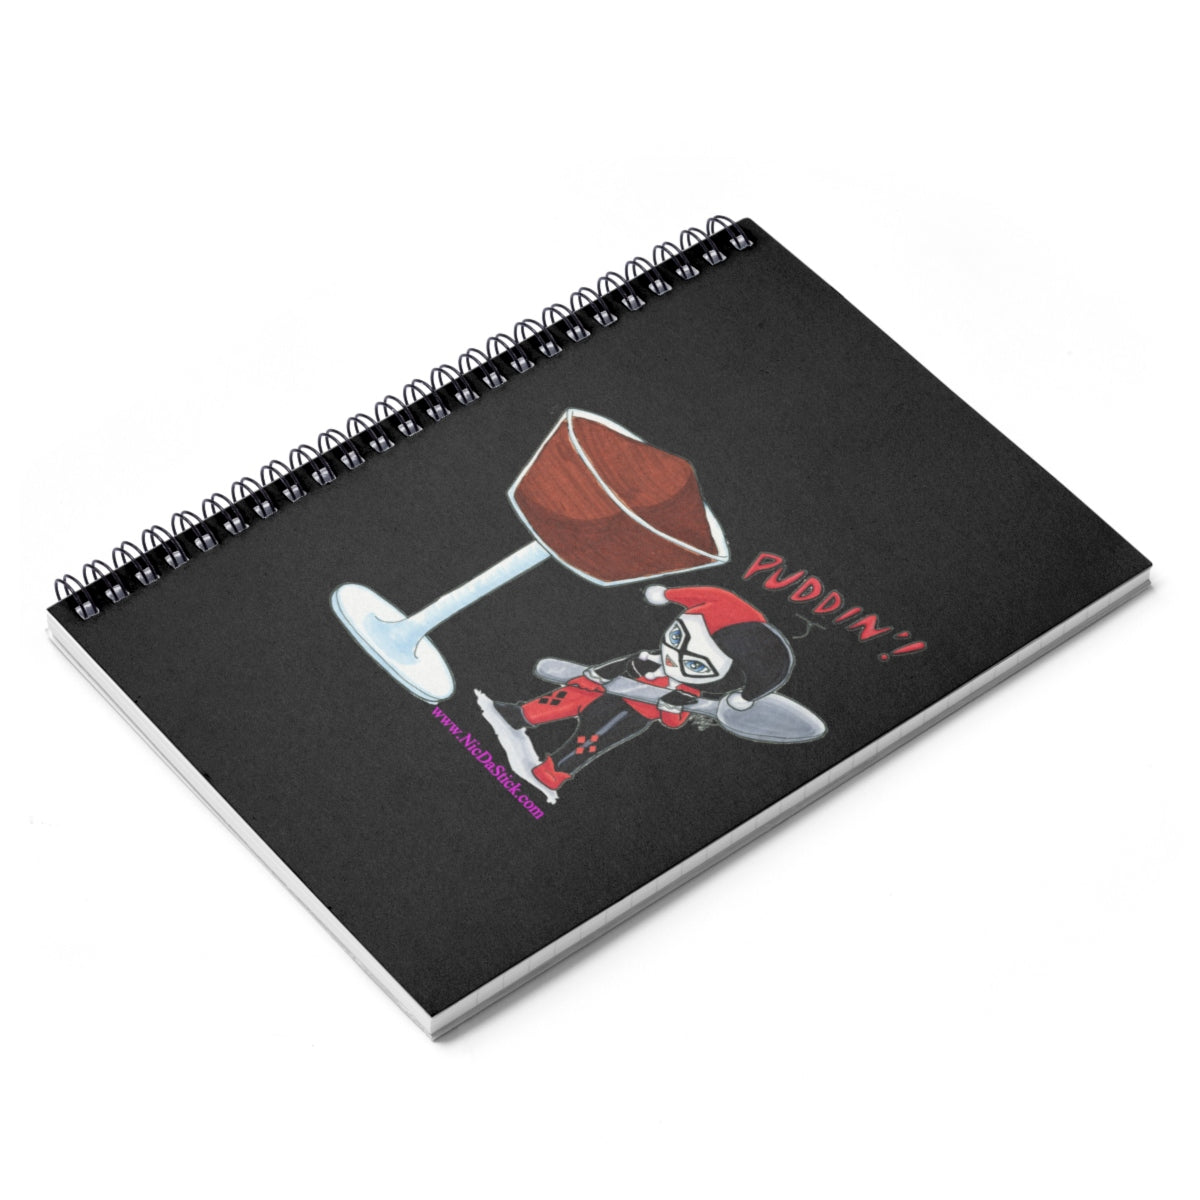 Puddin - Harley Quinn Spiral Notebook - Ruled Line,Paper products - Nic Da Stick Creations